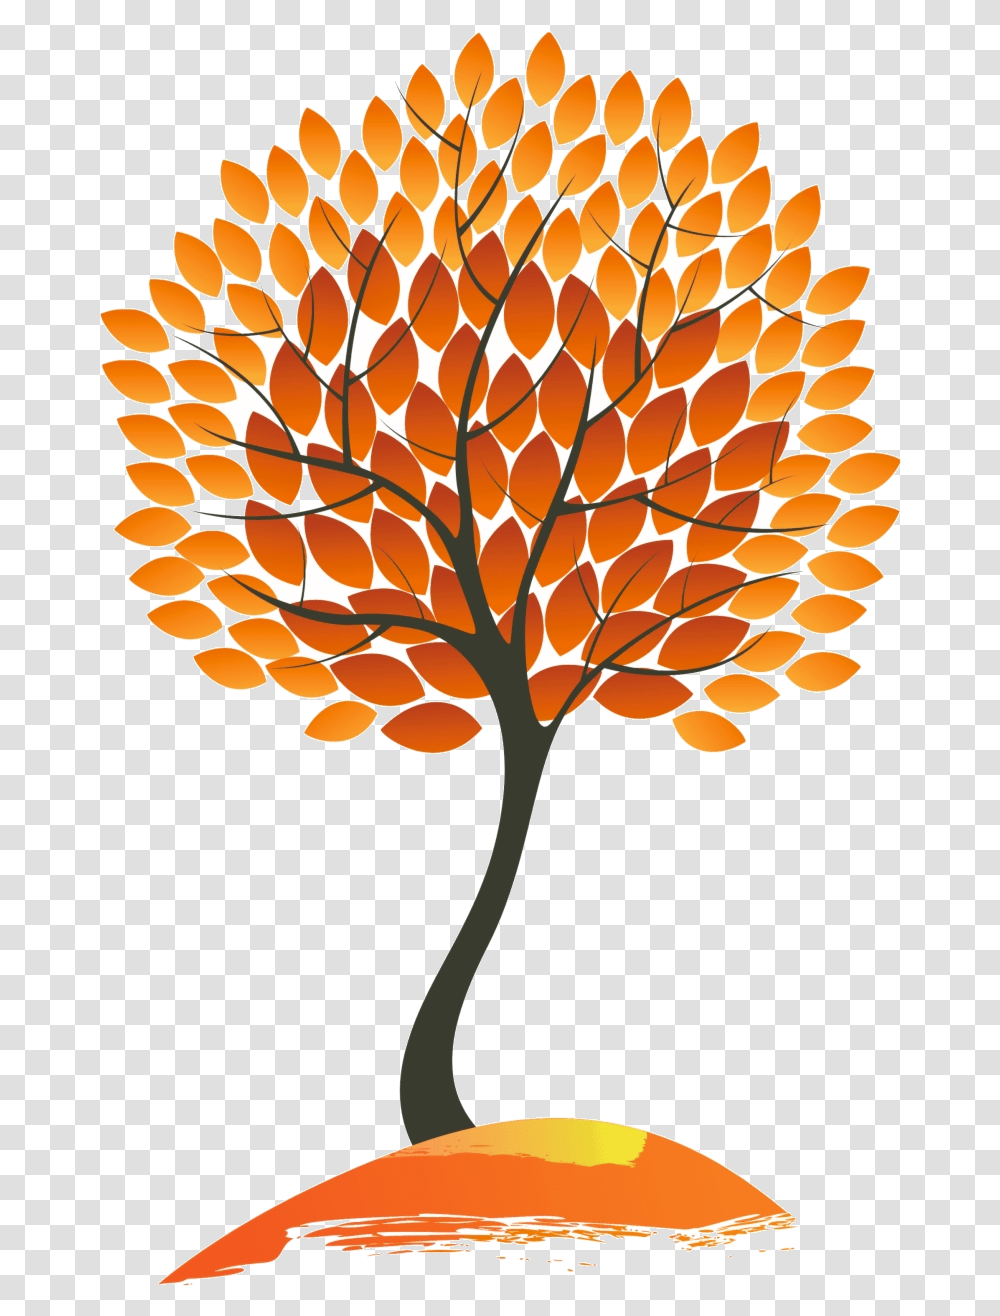 Fall Tree Autumn Trees Clipart Free Images Autumn Tree Clipart, Lamp, Lampshade, Lantern, Chandelier Transparent Png